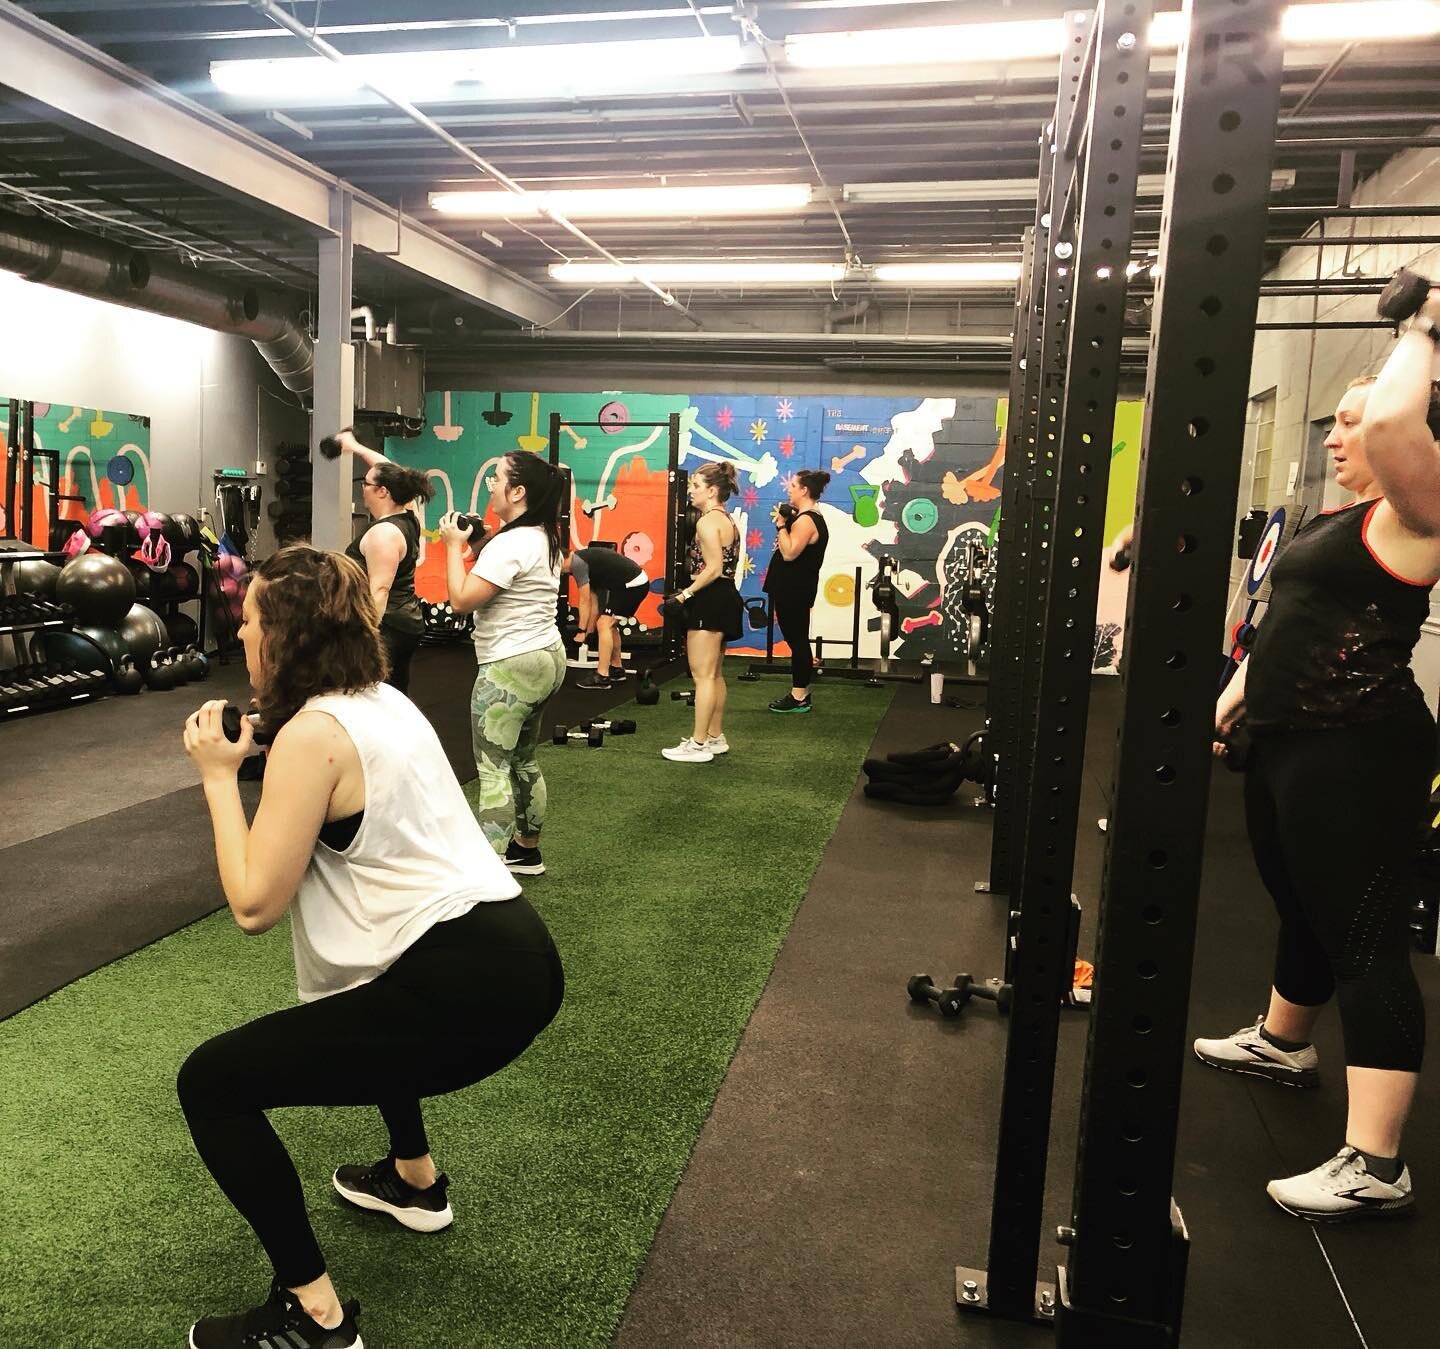 Full Body Friday Express! Great start to the weekend every Friday at 11:30. See you soon! #strong #move #fitness #minneapolisfitness #neminneapolis #nempls #northeastminneapolis